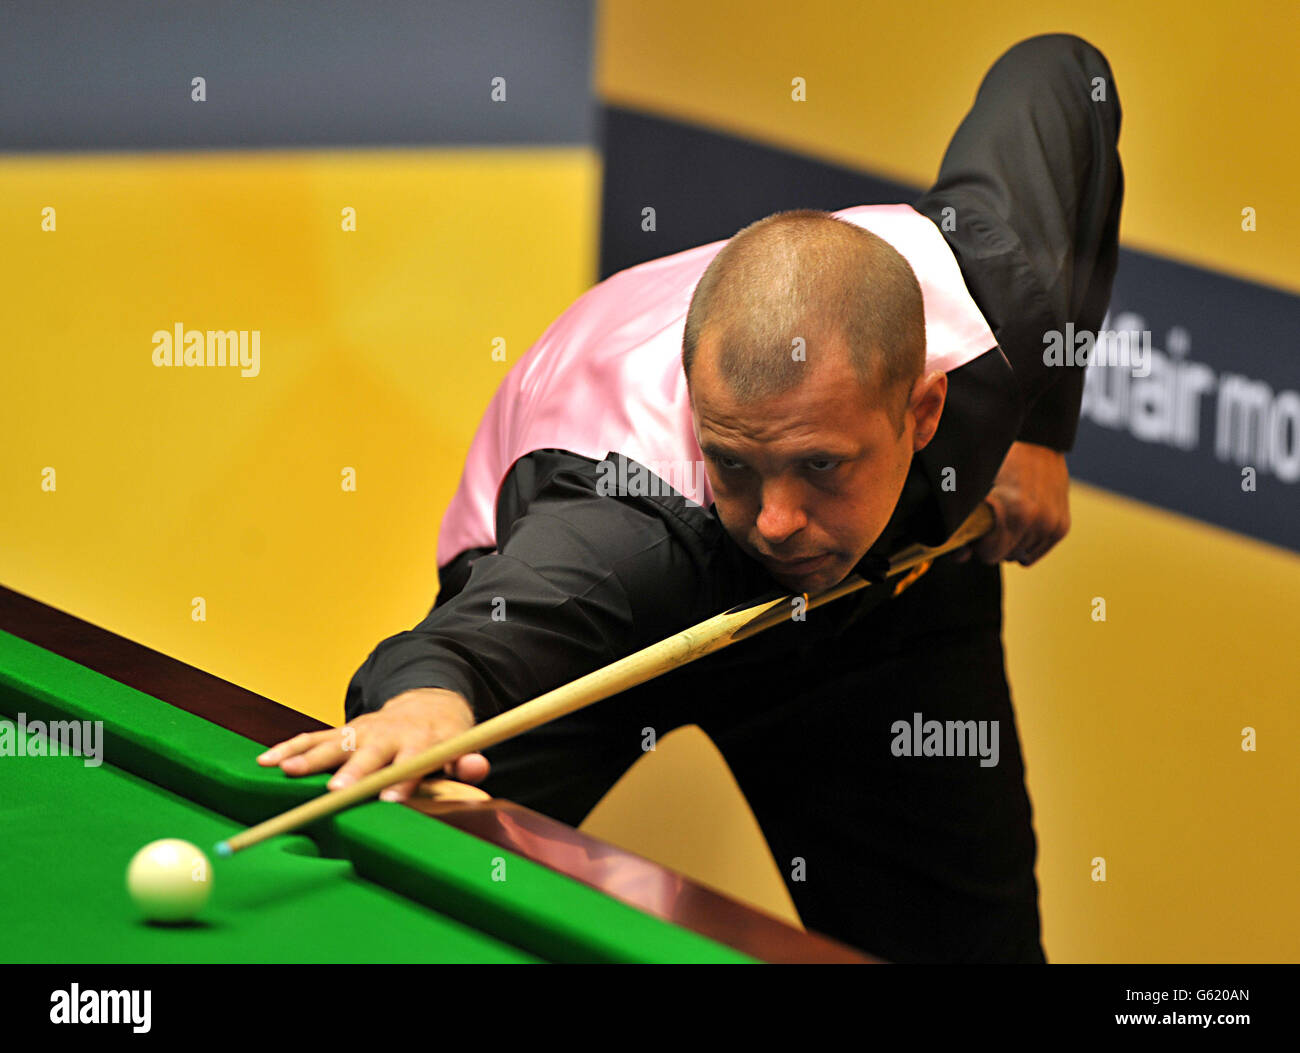 Barry Hawkins in action during his first round match against Jack Lisowski during the Betfair World Championships at the Crucible, Sheffield. Stock Photo